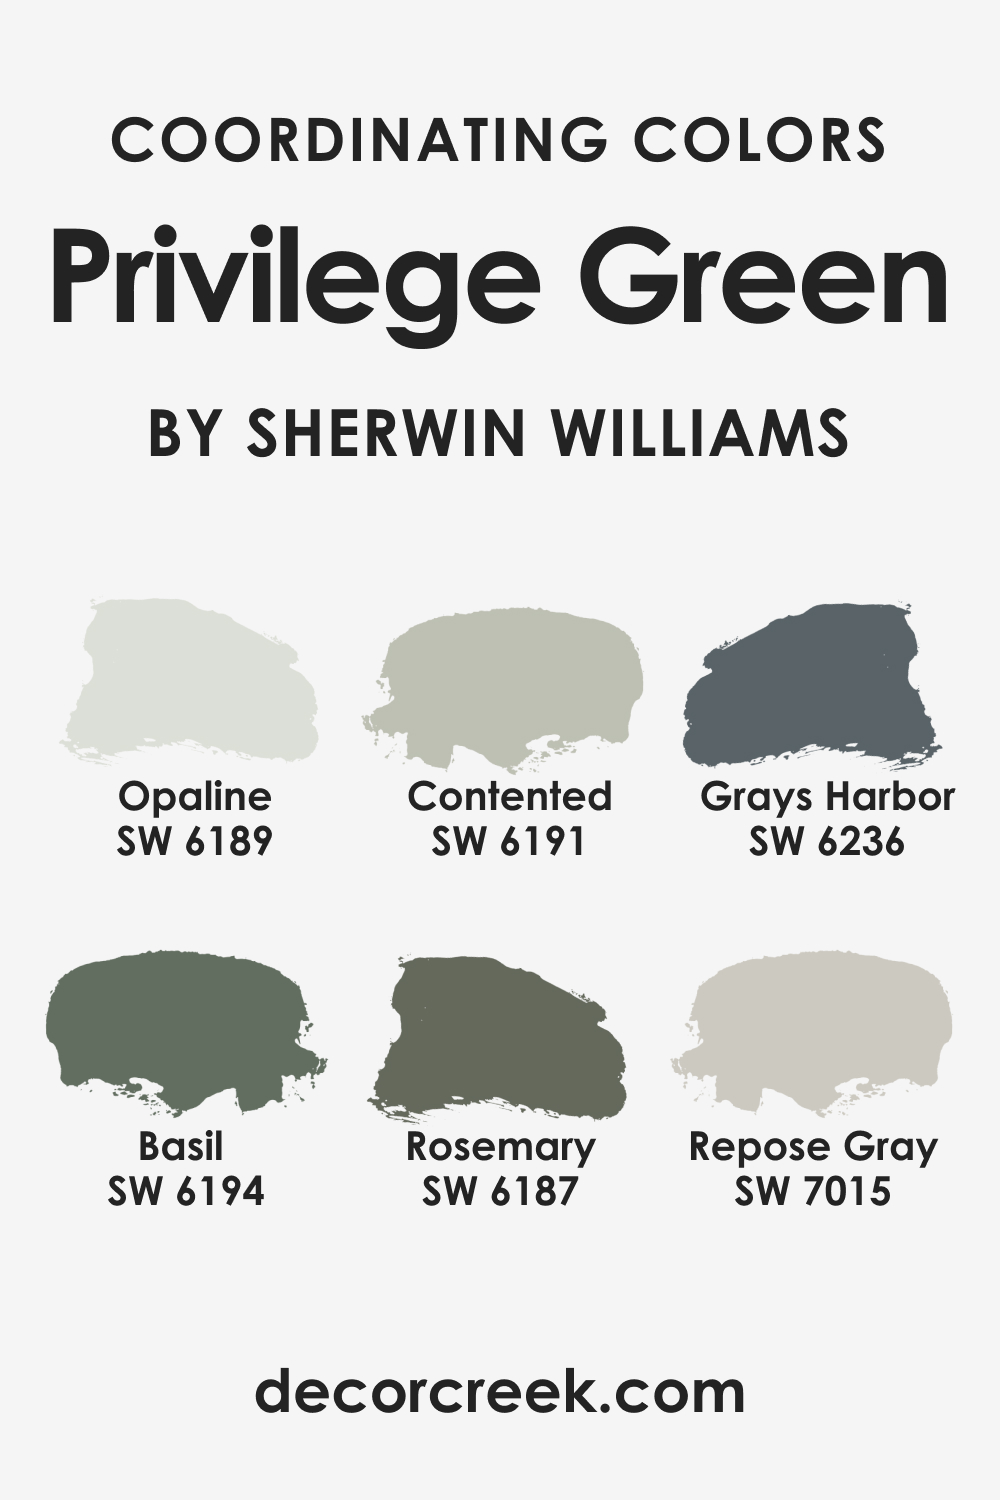 Coordinating Colors That Work With SW Privilege Green